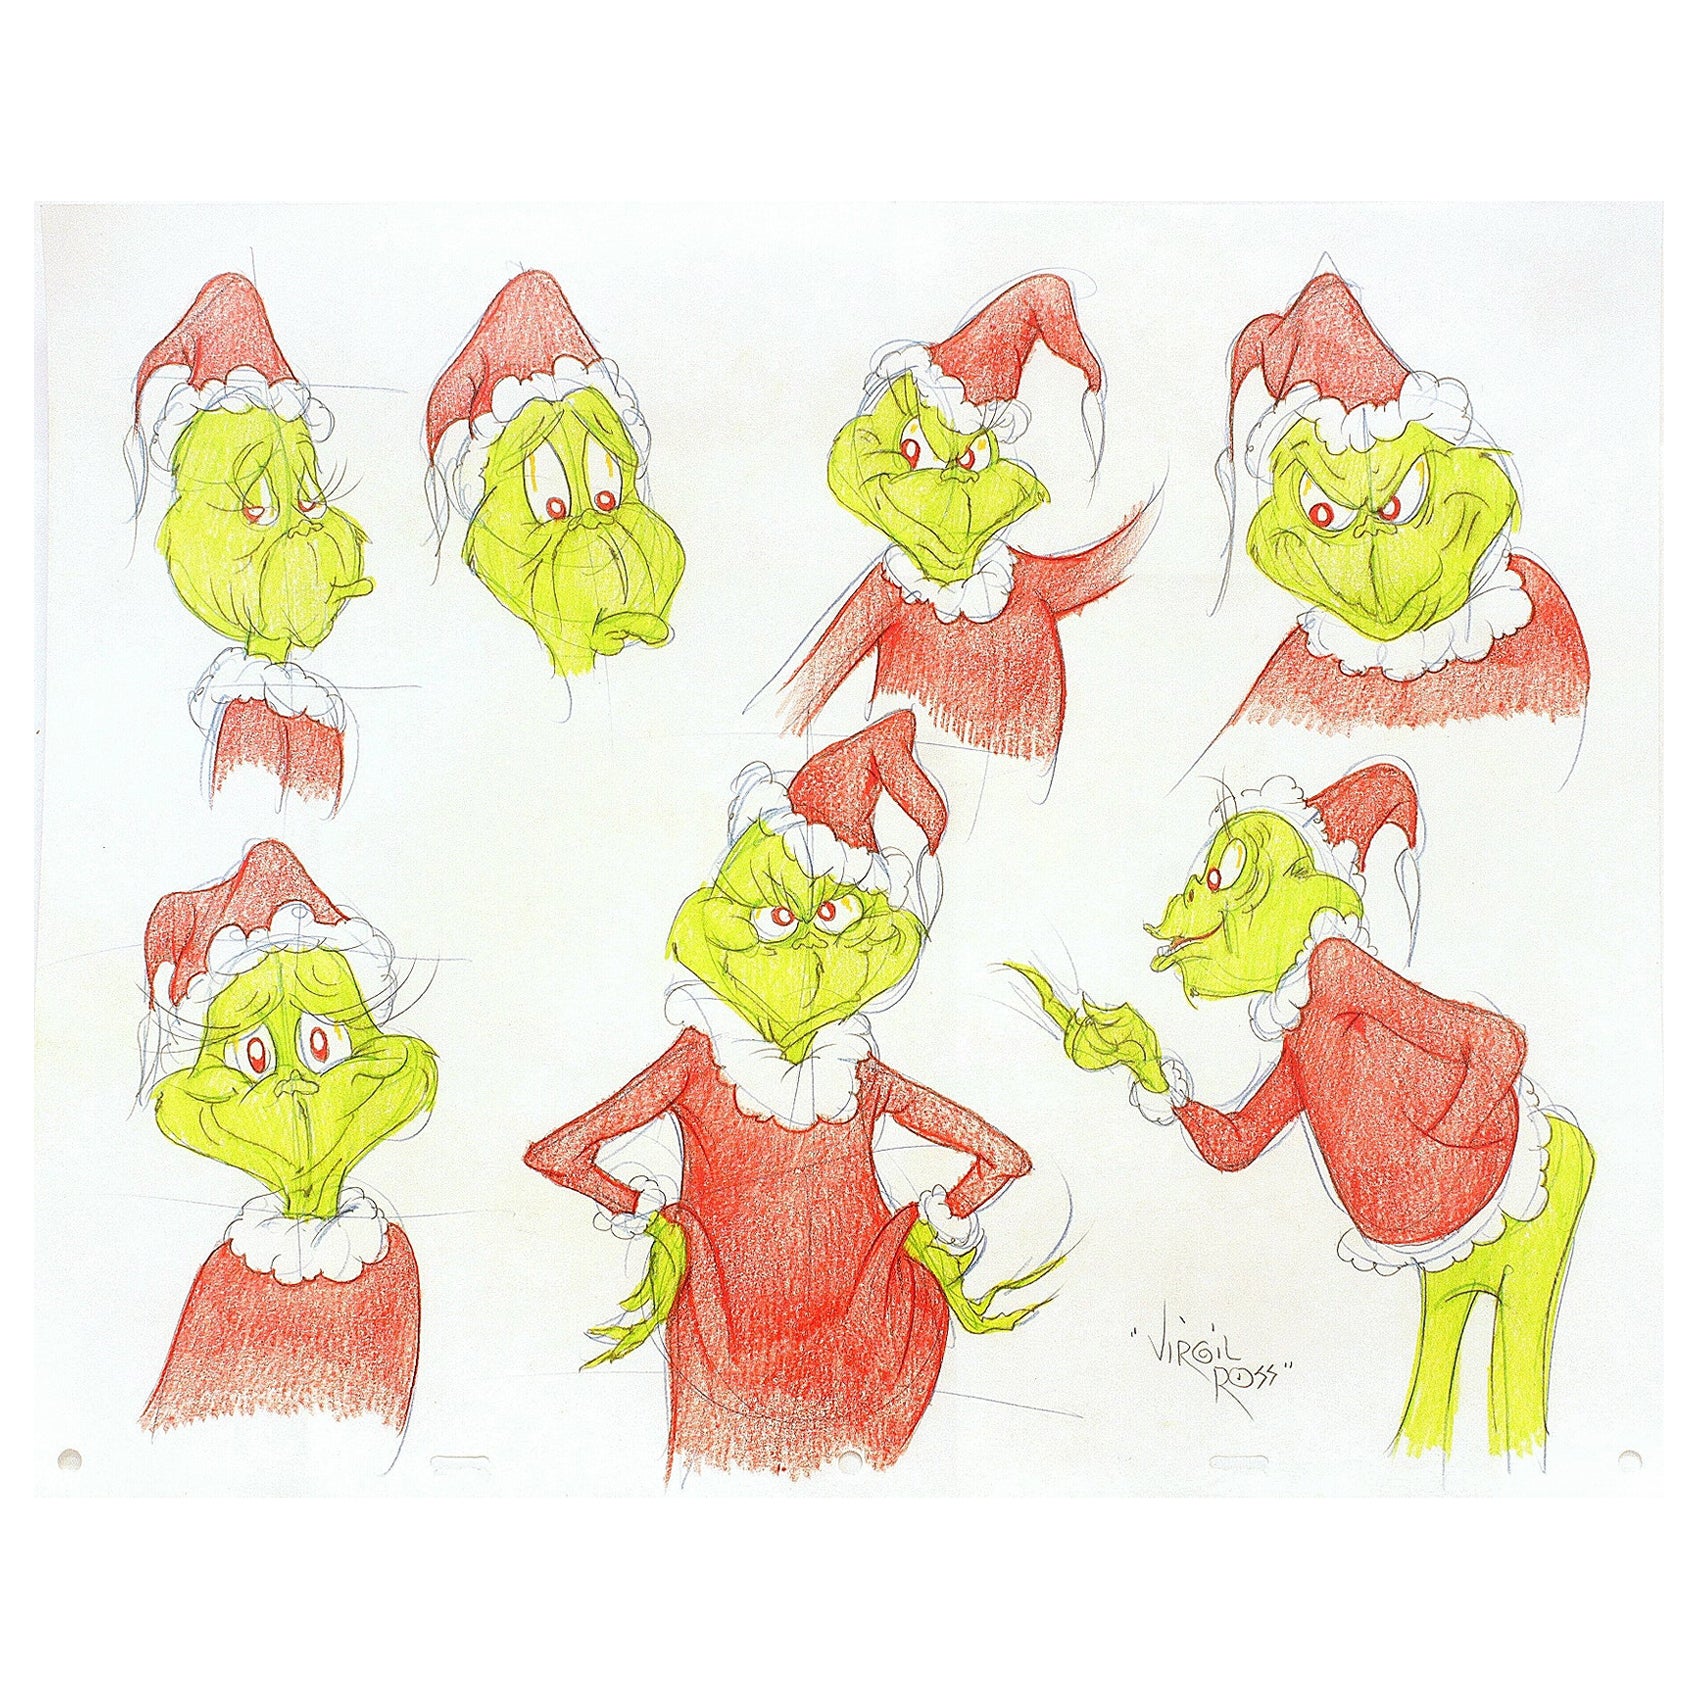 How the Grinch Stole Christmas, Seven Original Drawings Signed by Virgil Ross